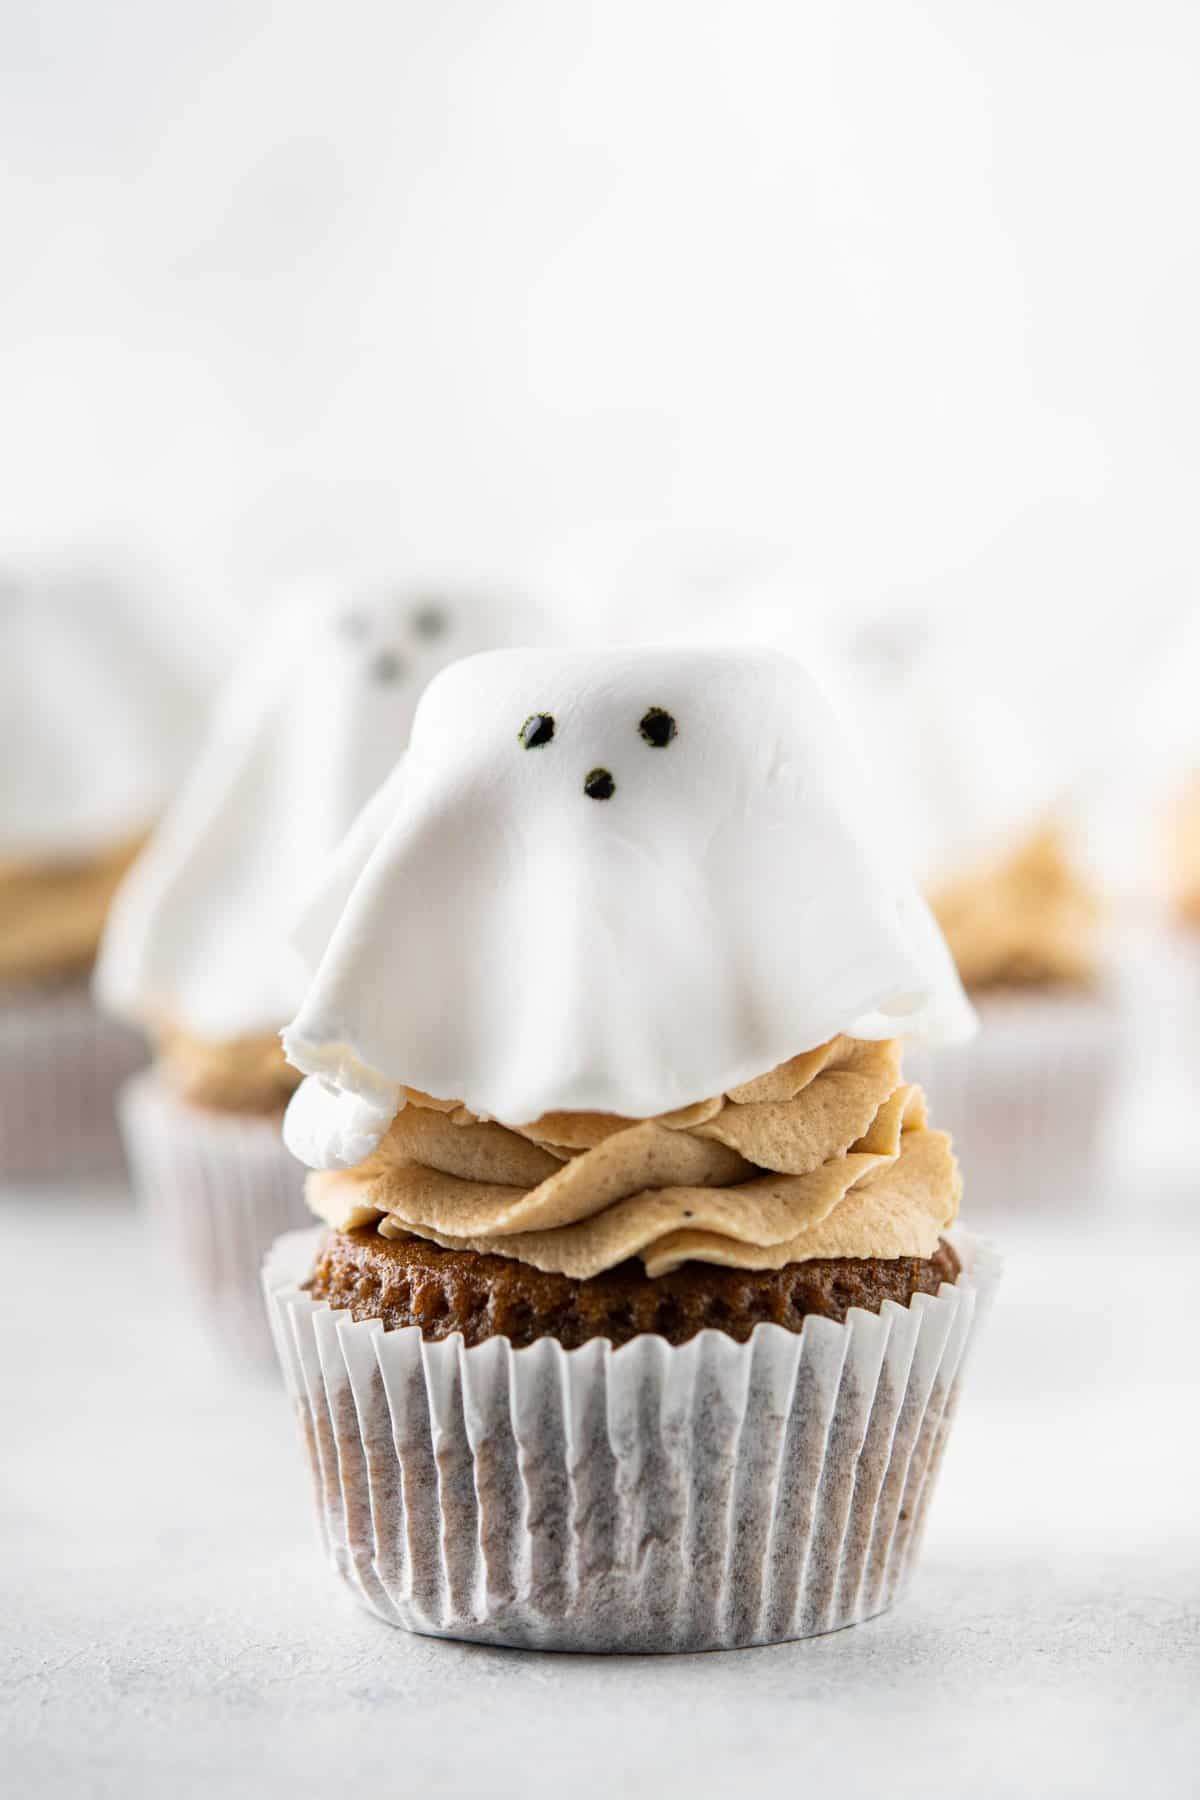 Cupcake with fondant shaped as a ghost on a chocolate cupcake. 